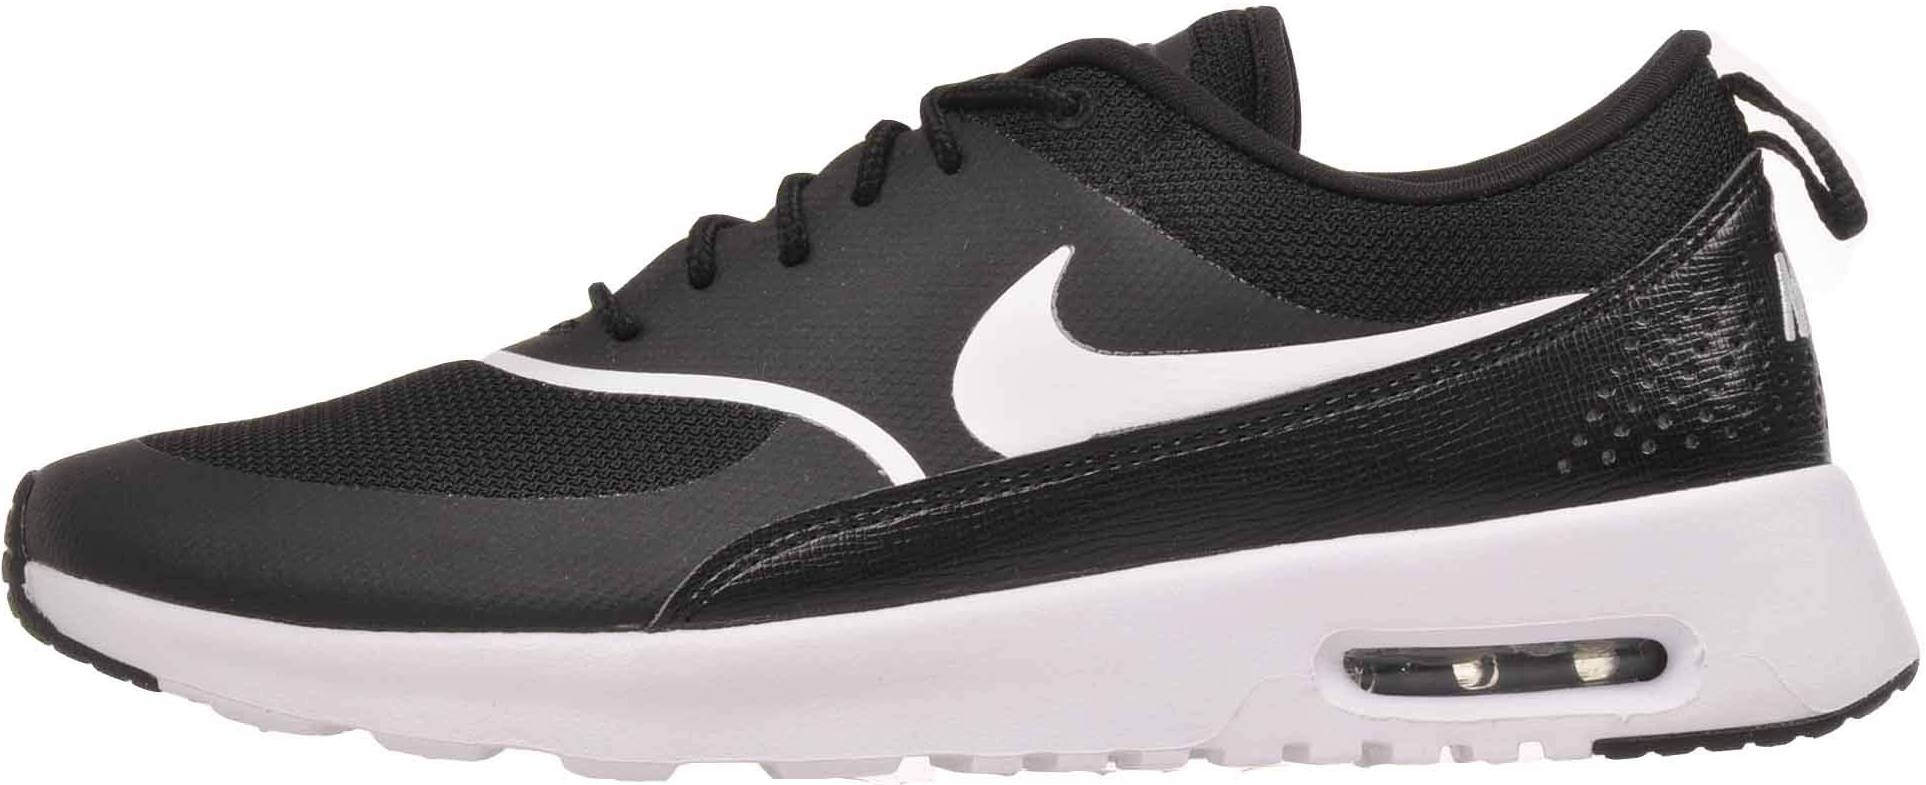 Nike Air Max Thea sneakers in 10 colors (only £60) | RunRepeat